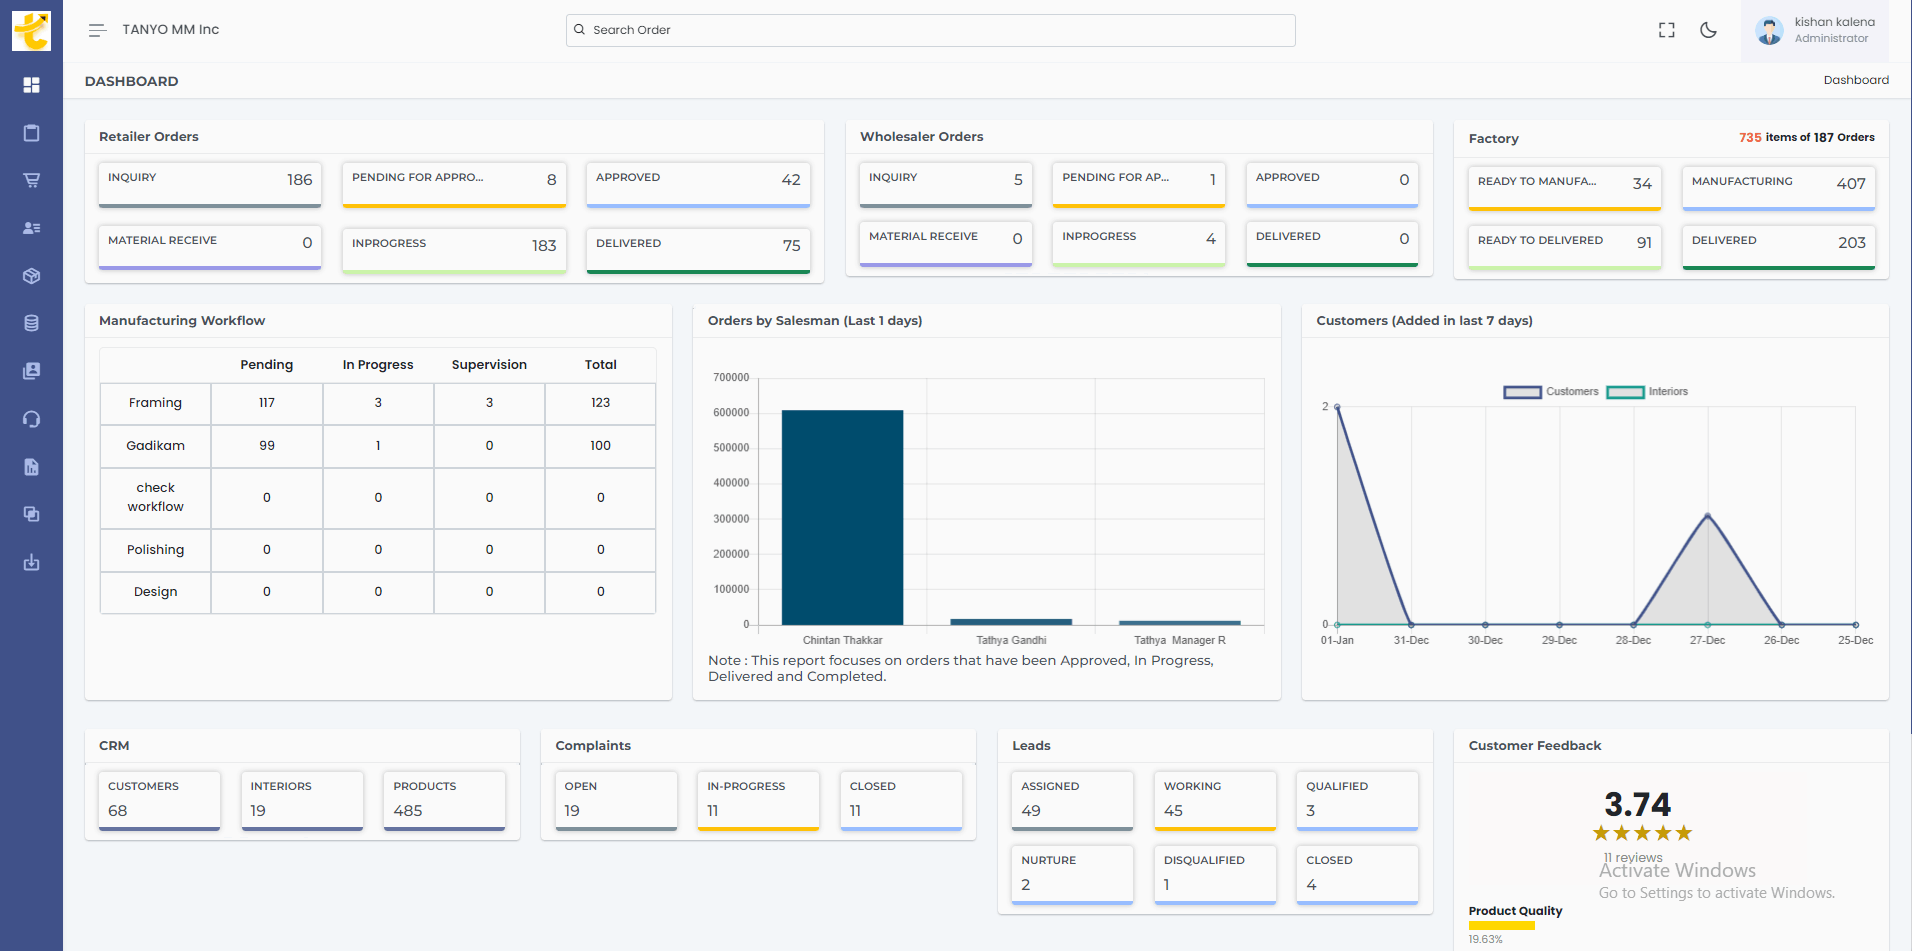 Tanyo CRM business dashboard with various sections displaying retailer and wholesaler orders, manufacturing workflow, sales statistics, customer data, complaints, leads, and customer feedback ratings.